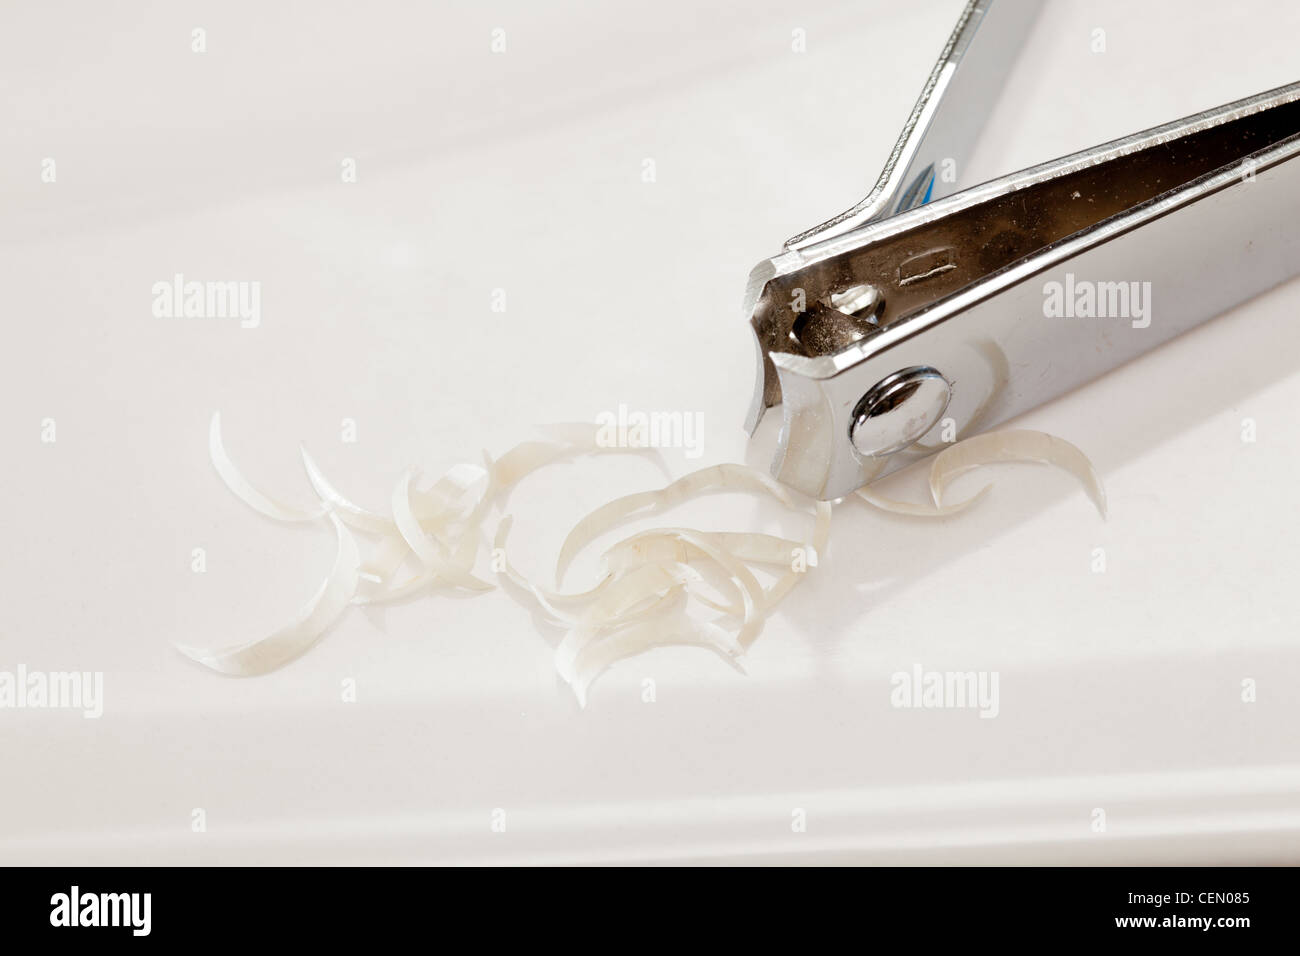 Finger nail clippings on bathroom sink Stock Photo